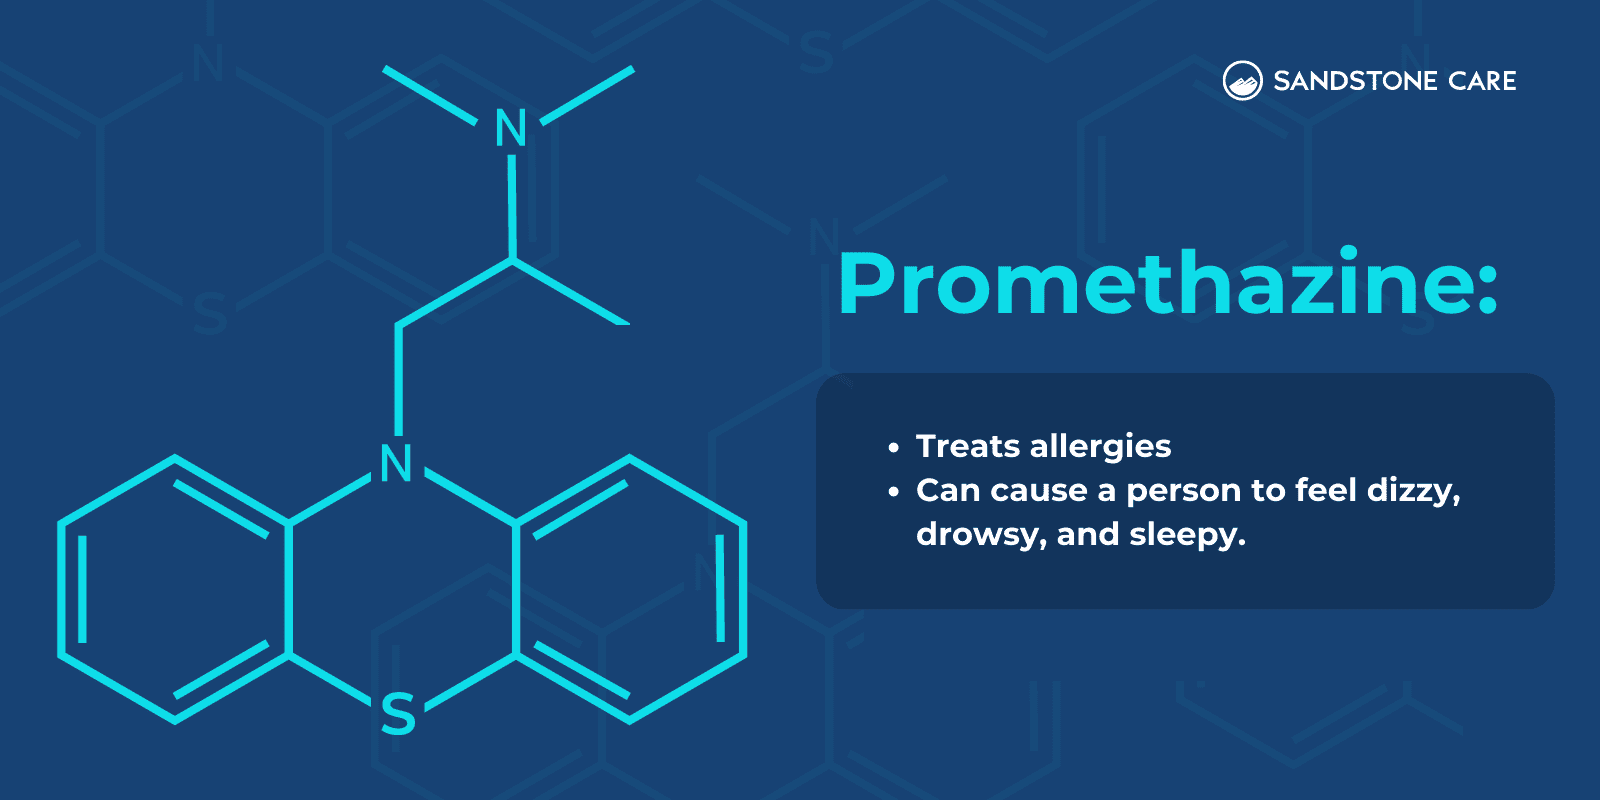 Promethazine chemical compound graphic next to "Promethazine" text and description of what Promethazine does